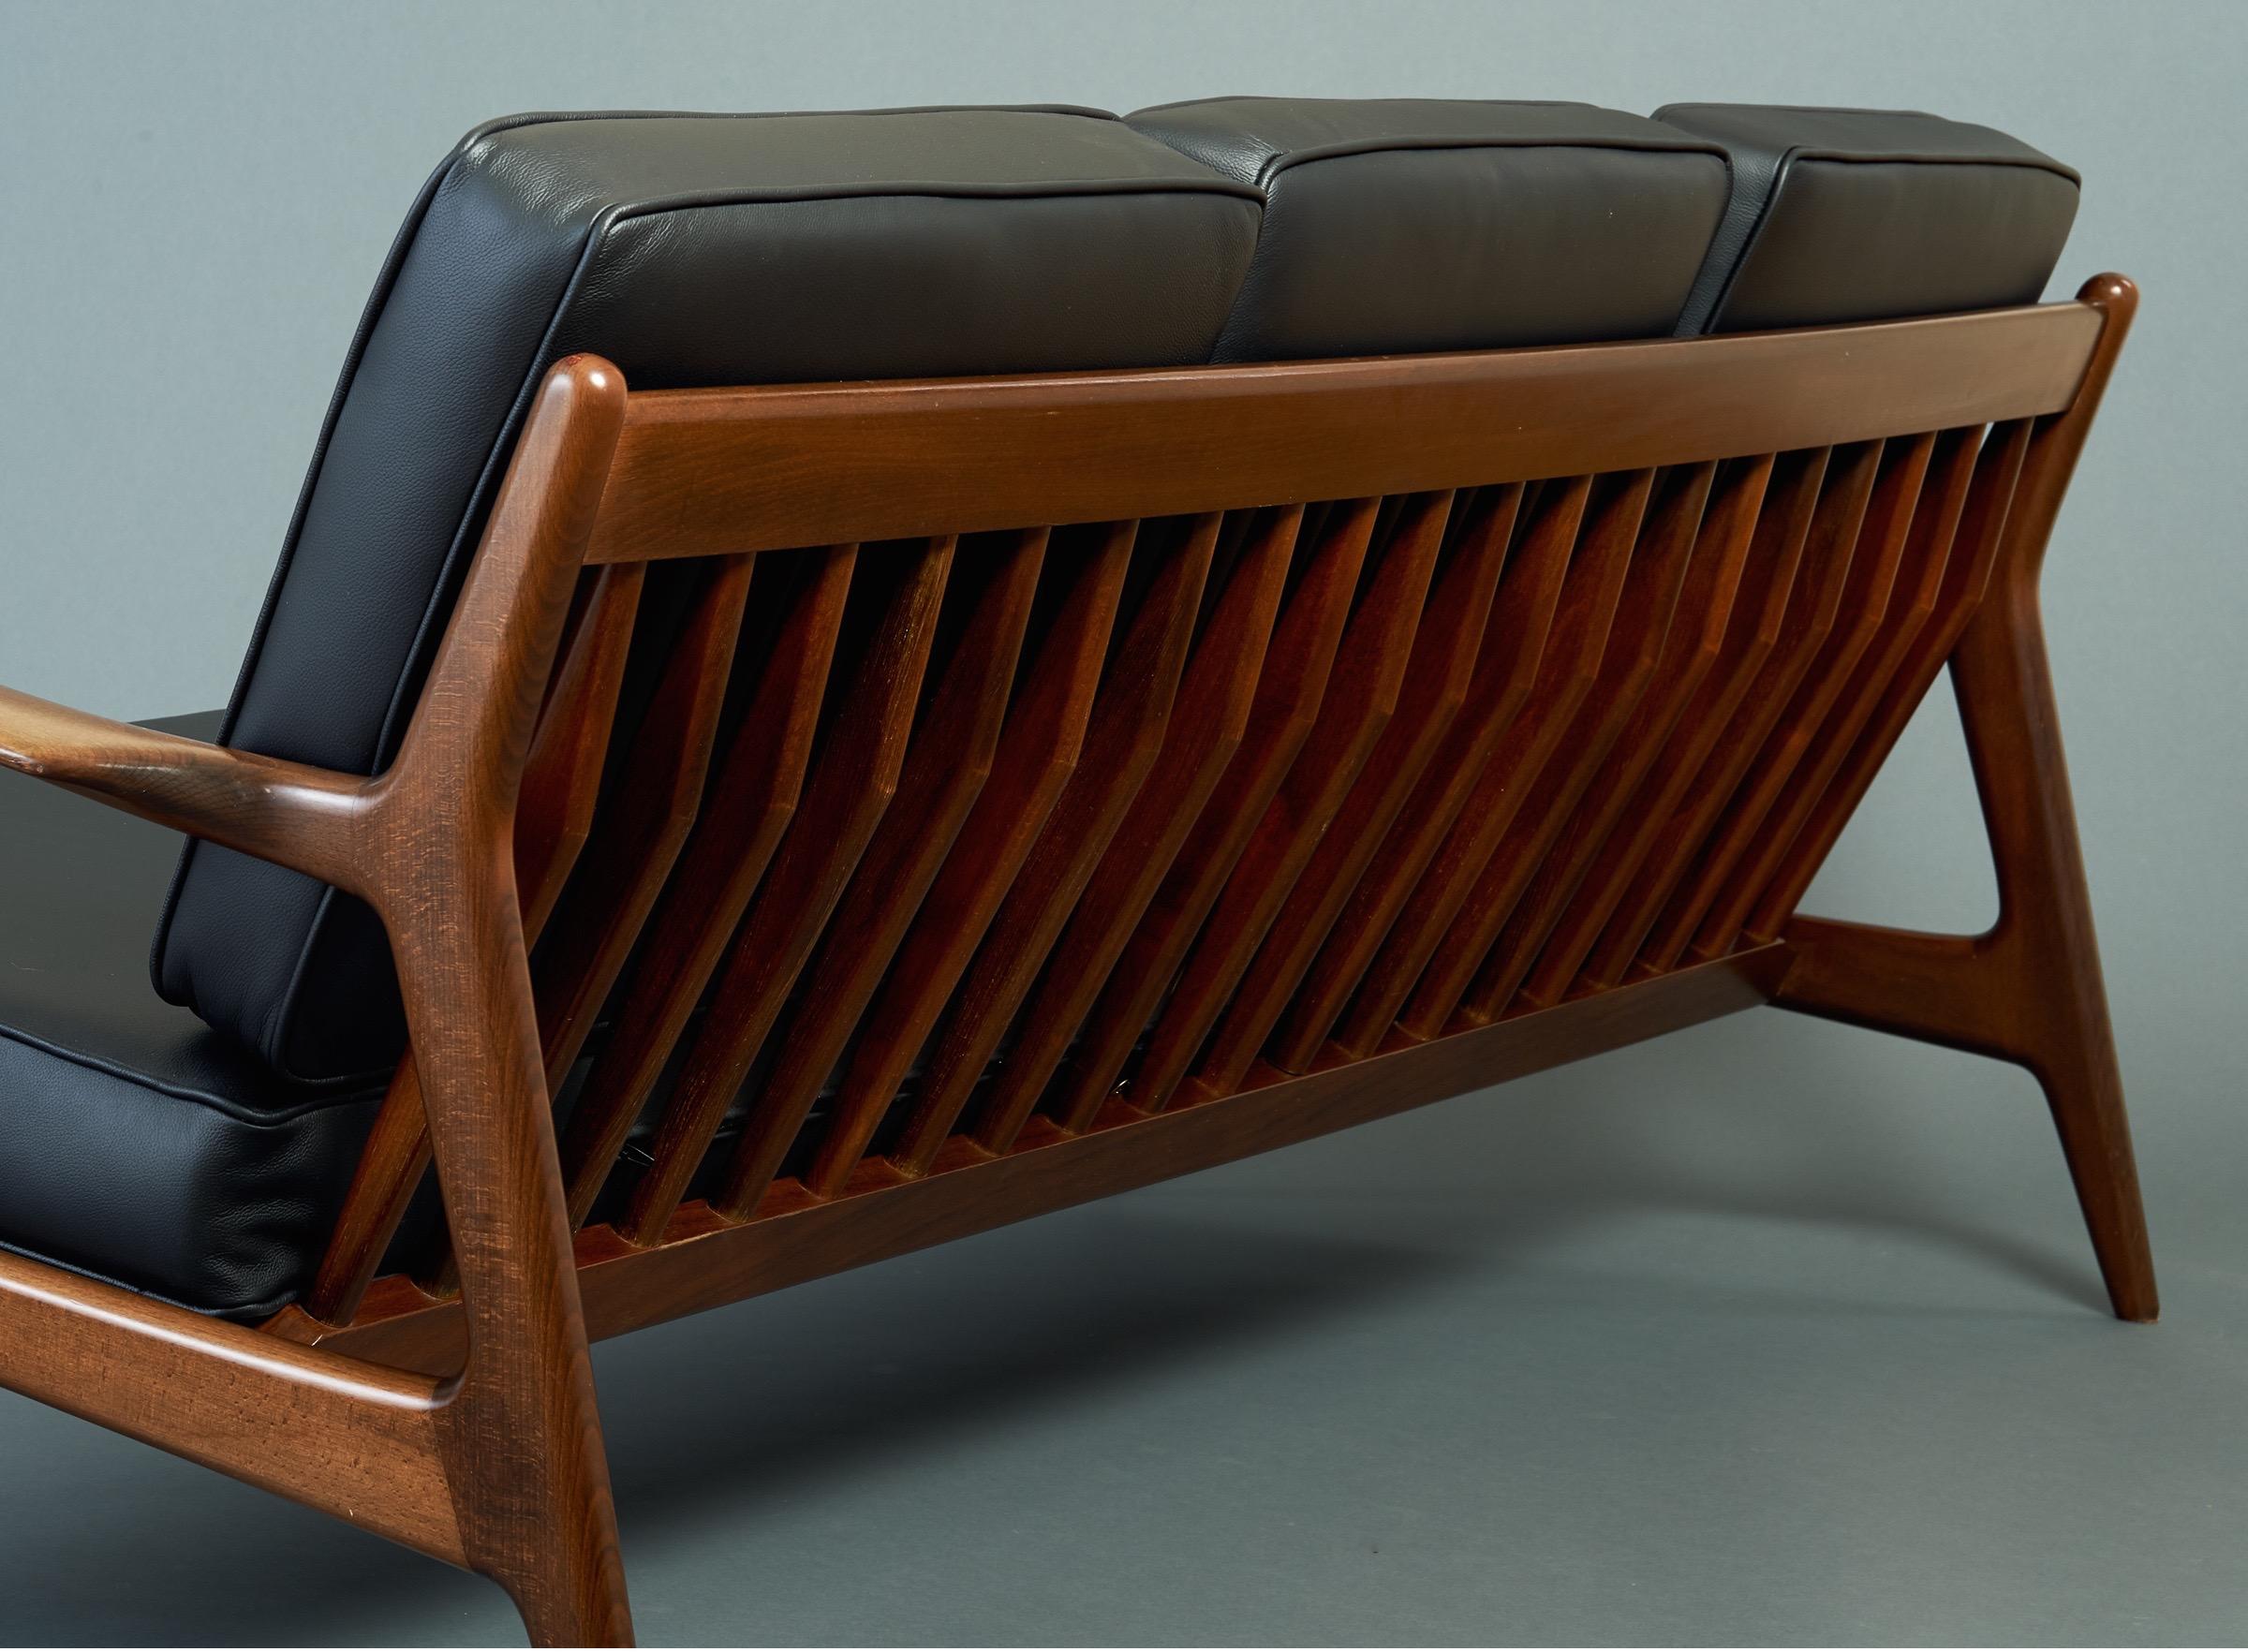 Stained Sleek Danish Modern Sofa by Ib Kofod-Larsen in Teak and Black Leather, 1950s For Sale